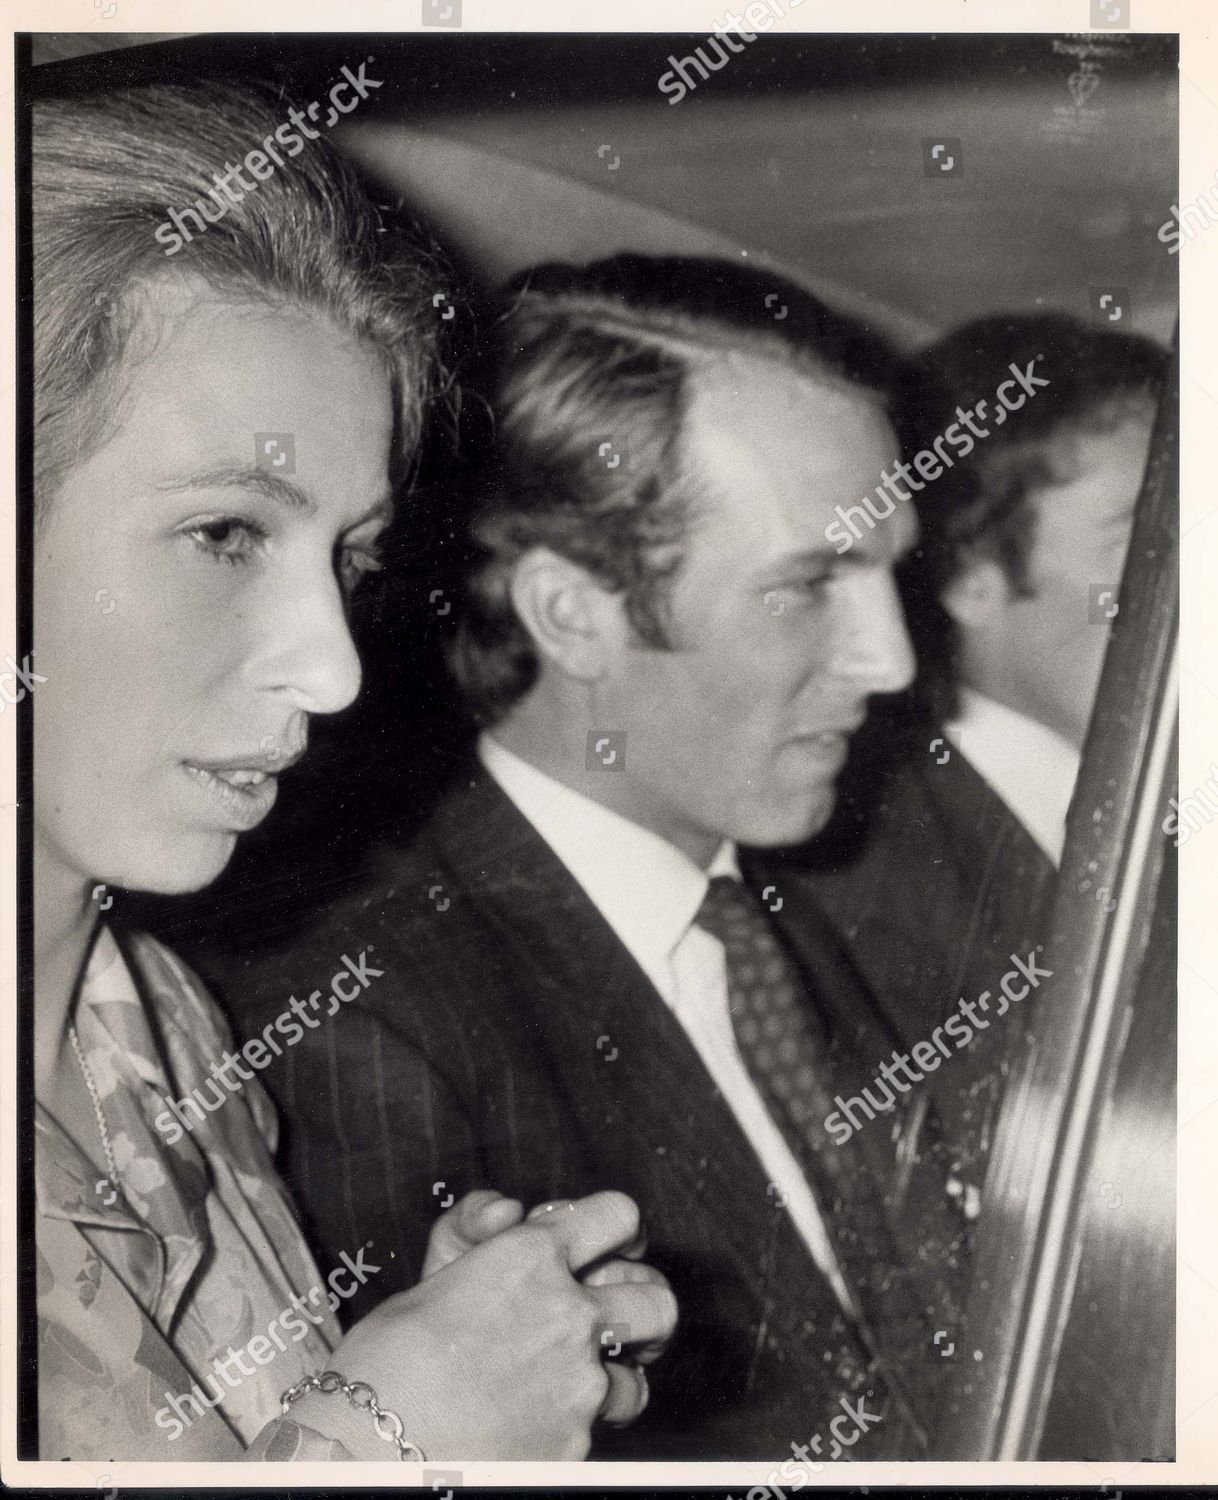 princess-anne-now-princess-royal-capt-mark-phillips-together-before-marriage-august-1973-princess-anne-and-capt-mark-phillips-leaving-piccadilly-theatre-after-seeing-gypsy-royalty-shutterstock-editorial-891021a.jpg